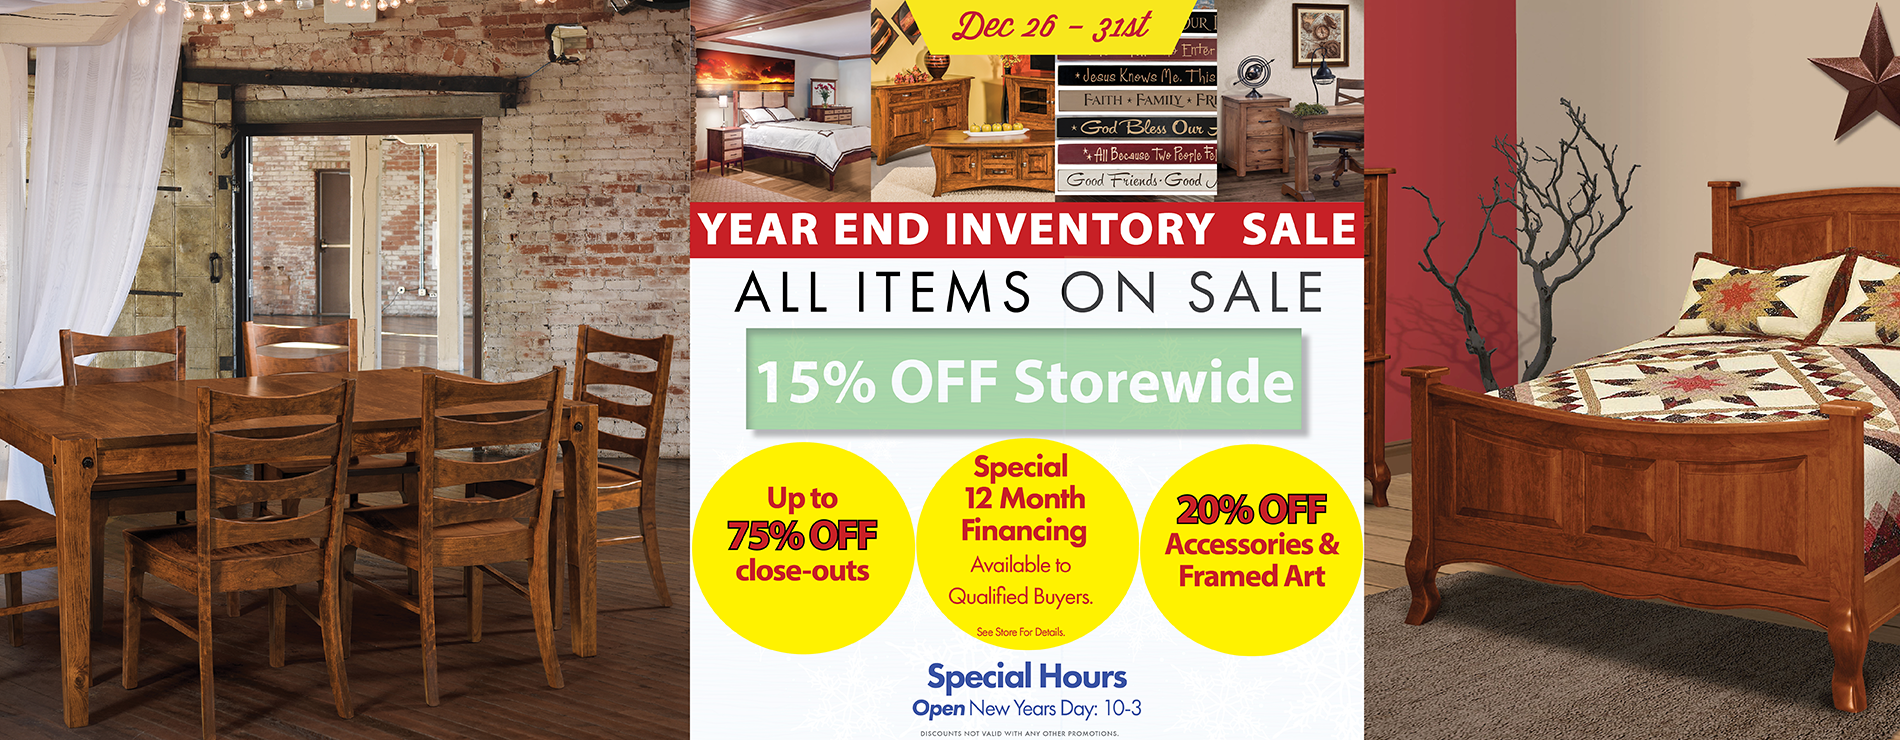 Weaver Furniture Sales After Christmas Year End Inventory Sale